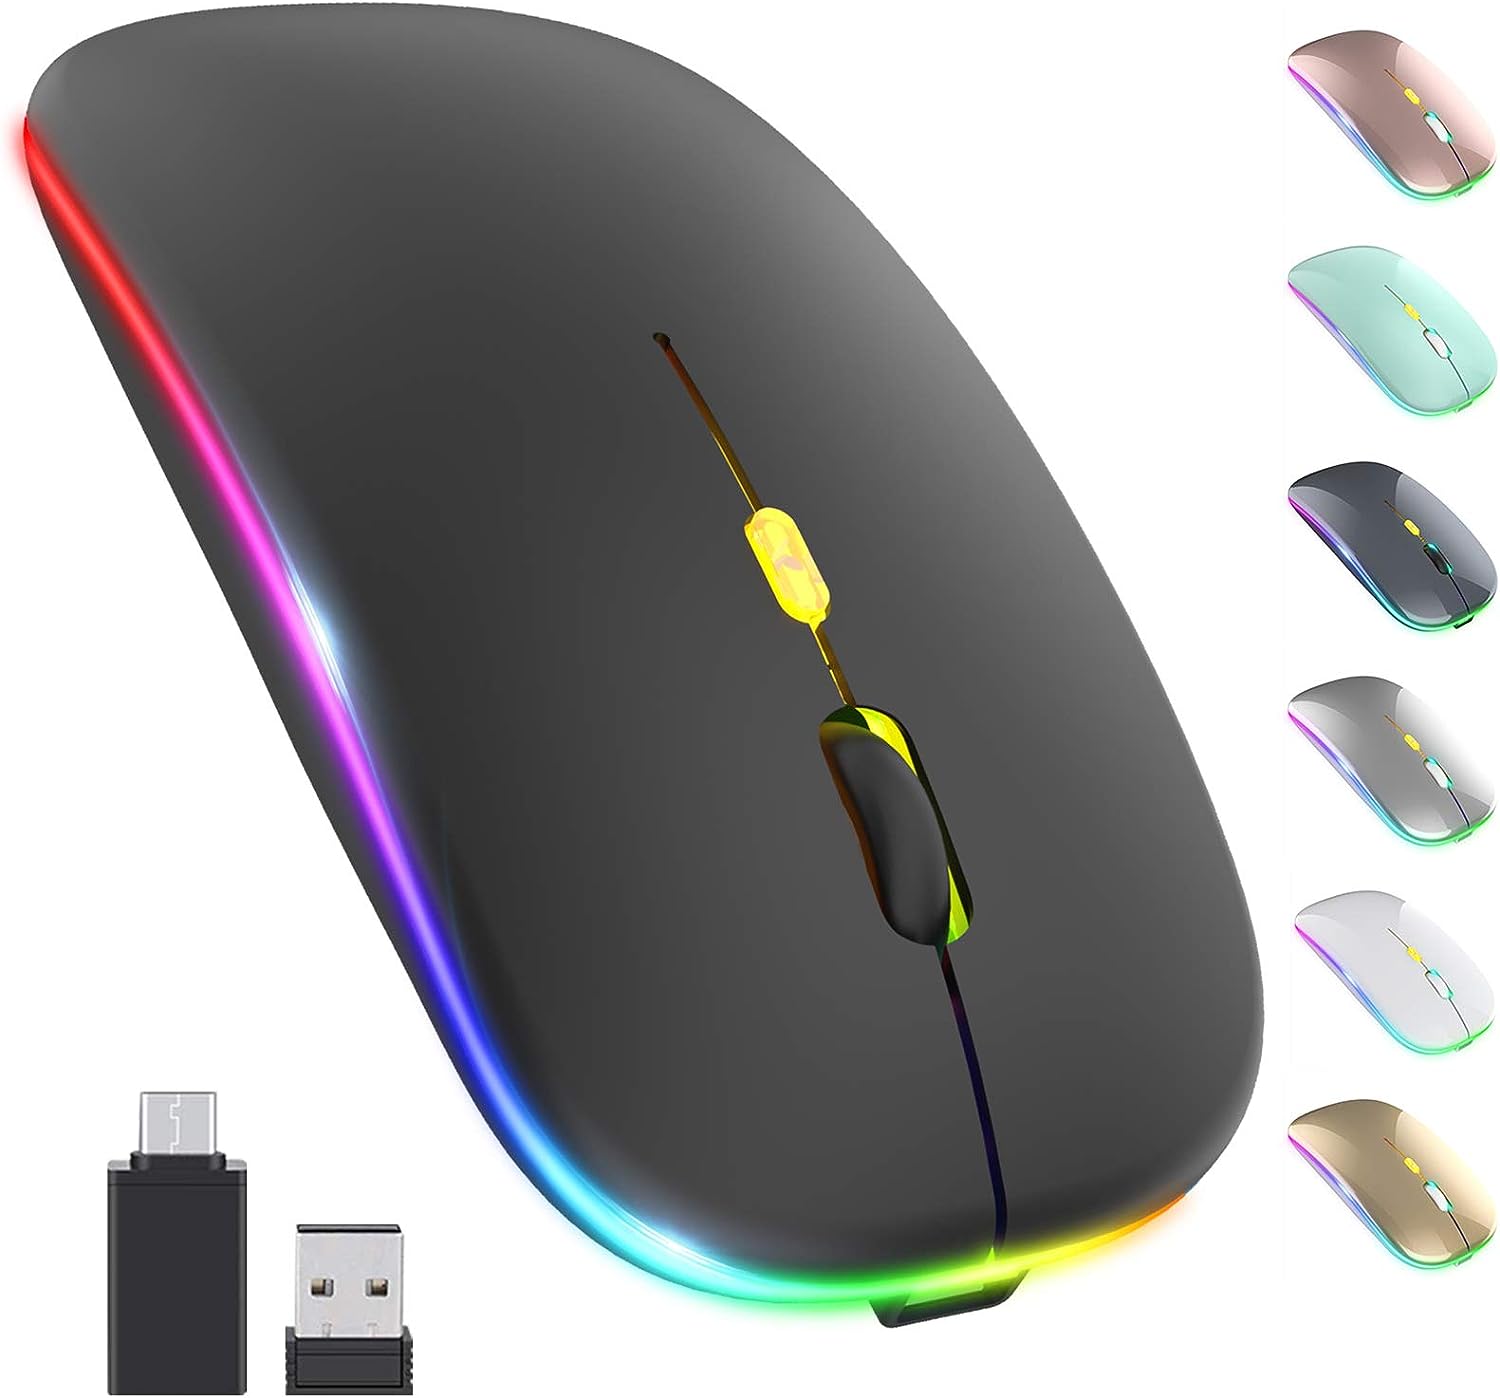 【Upgrade】 LED Wireless Mouse, Slim Silent Mouse 2.4G [...]